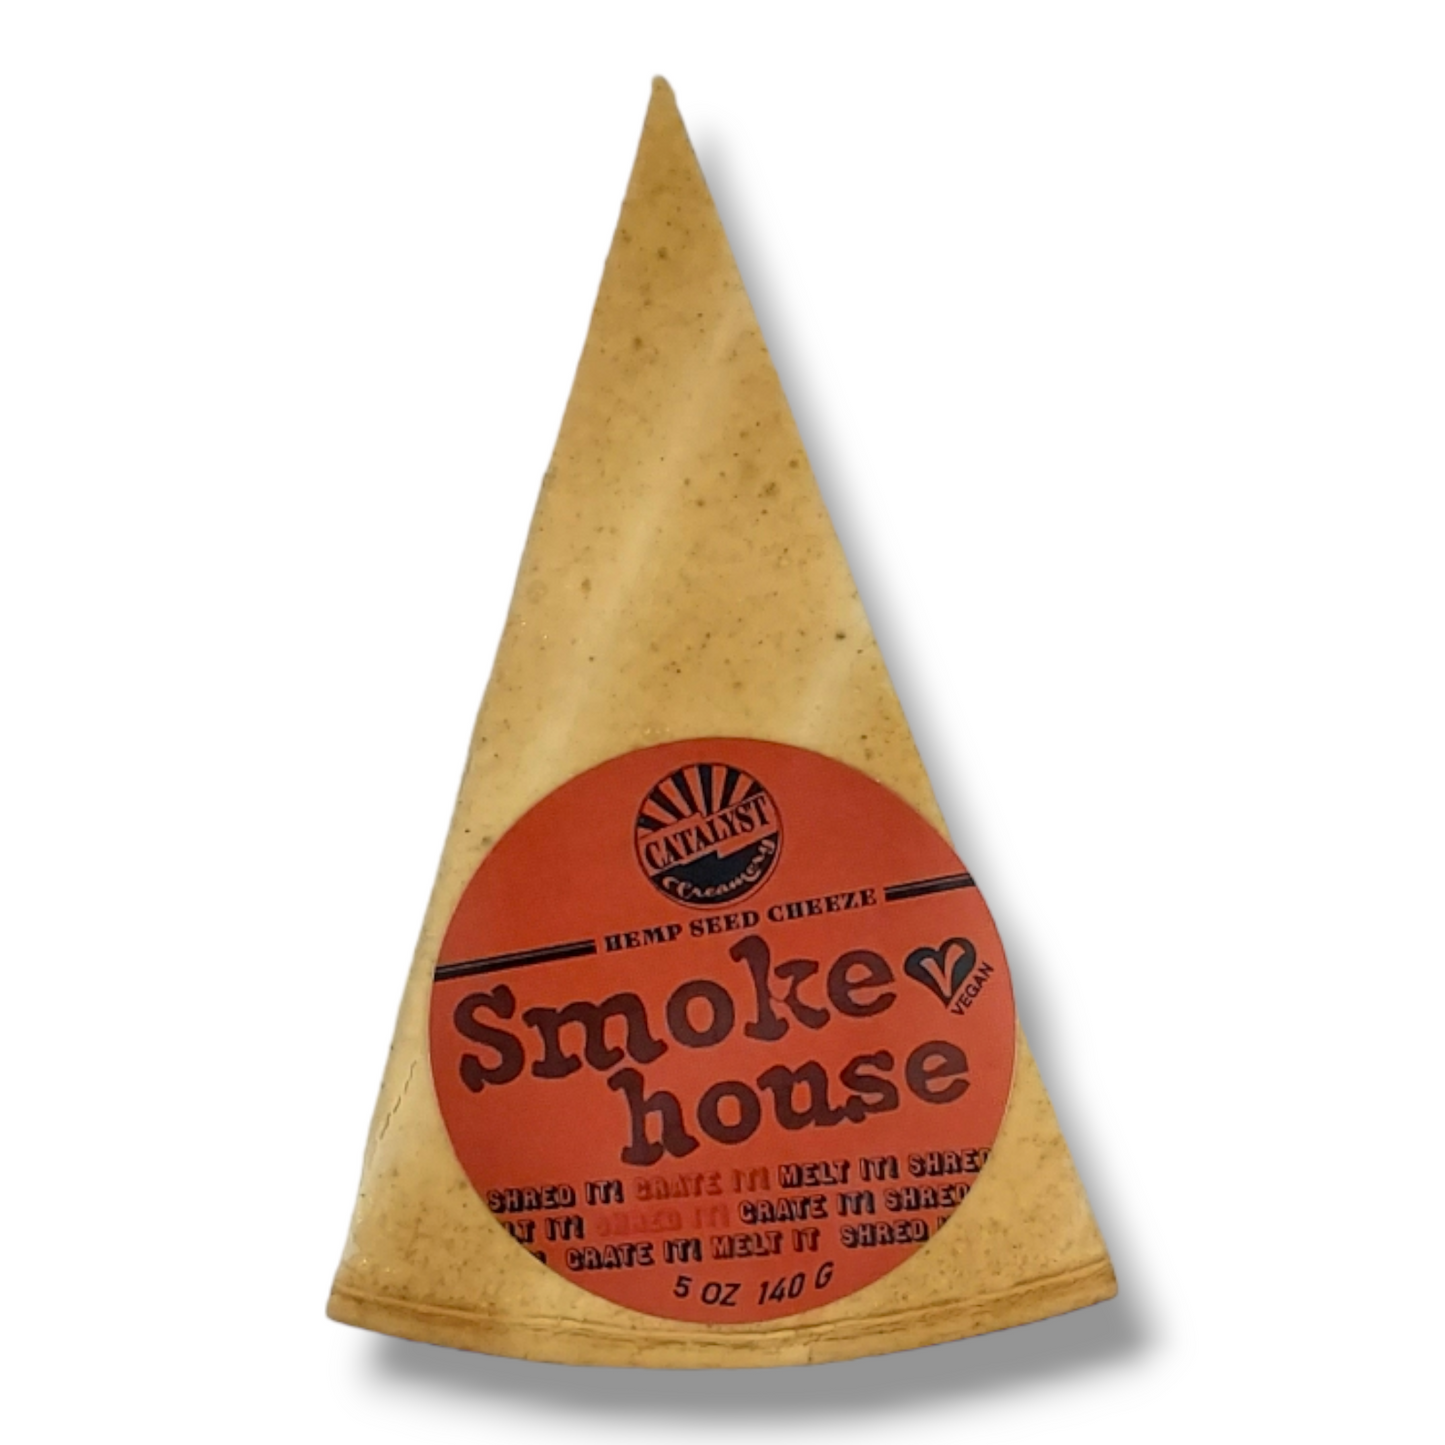 Smoke House Hmp Seed Cheeze By Catalyst Creamery 5oz